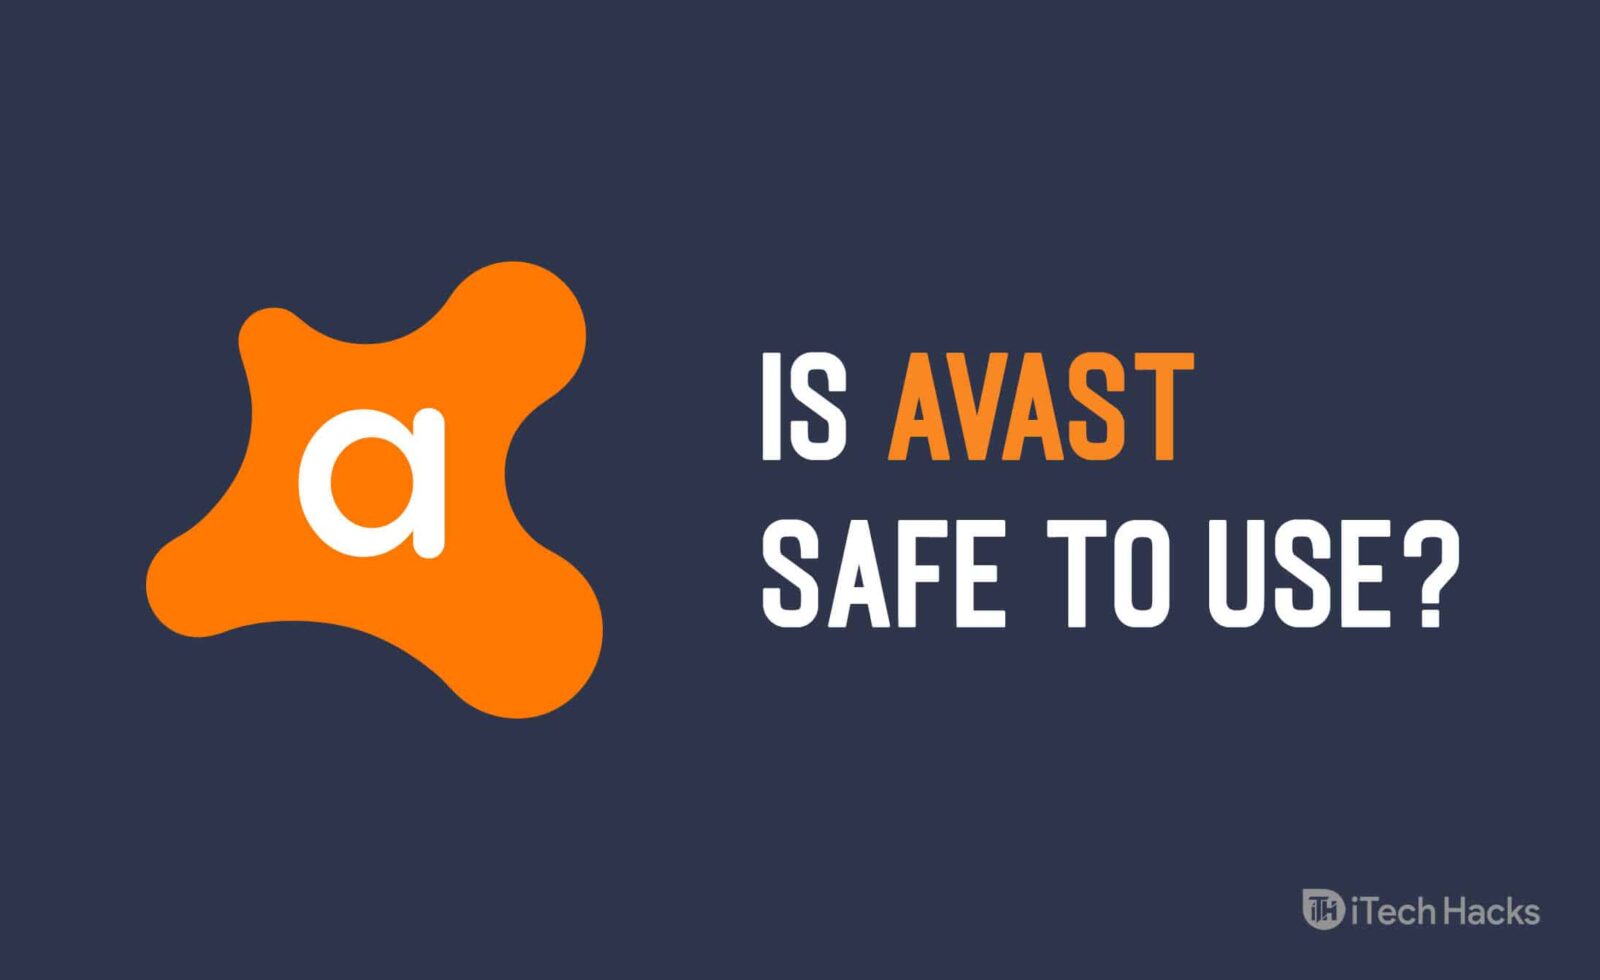 Avast Premium Security 2023 23.9.6082 download the new version for mac